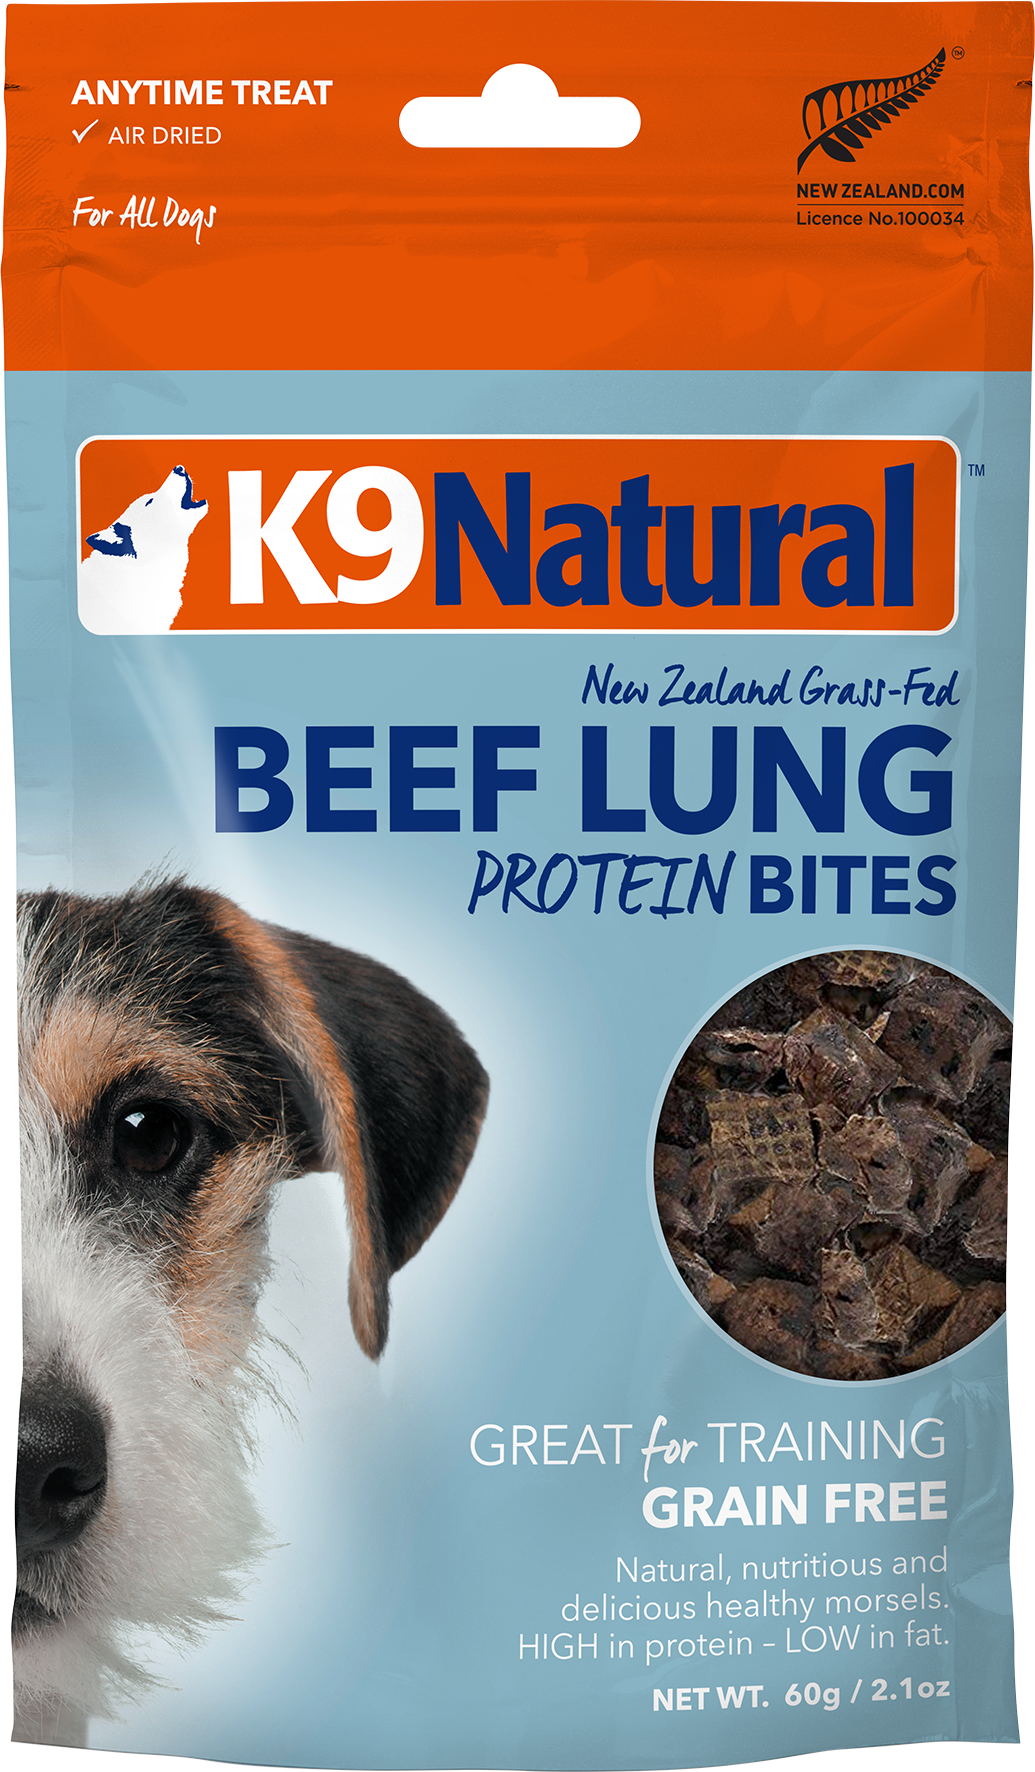 K9 Natural - Beef Lung Protein Bites